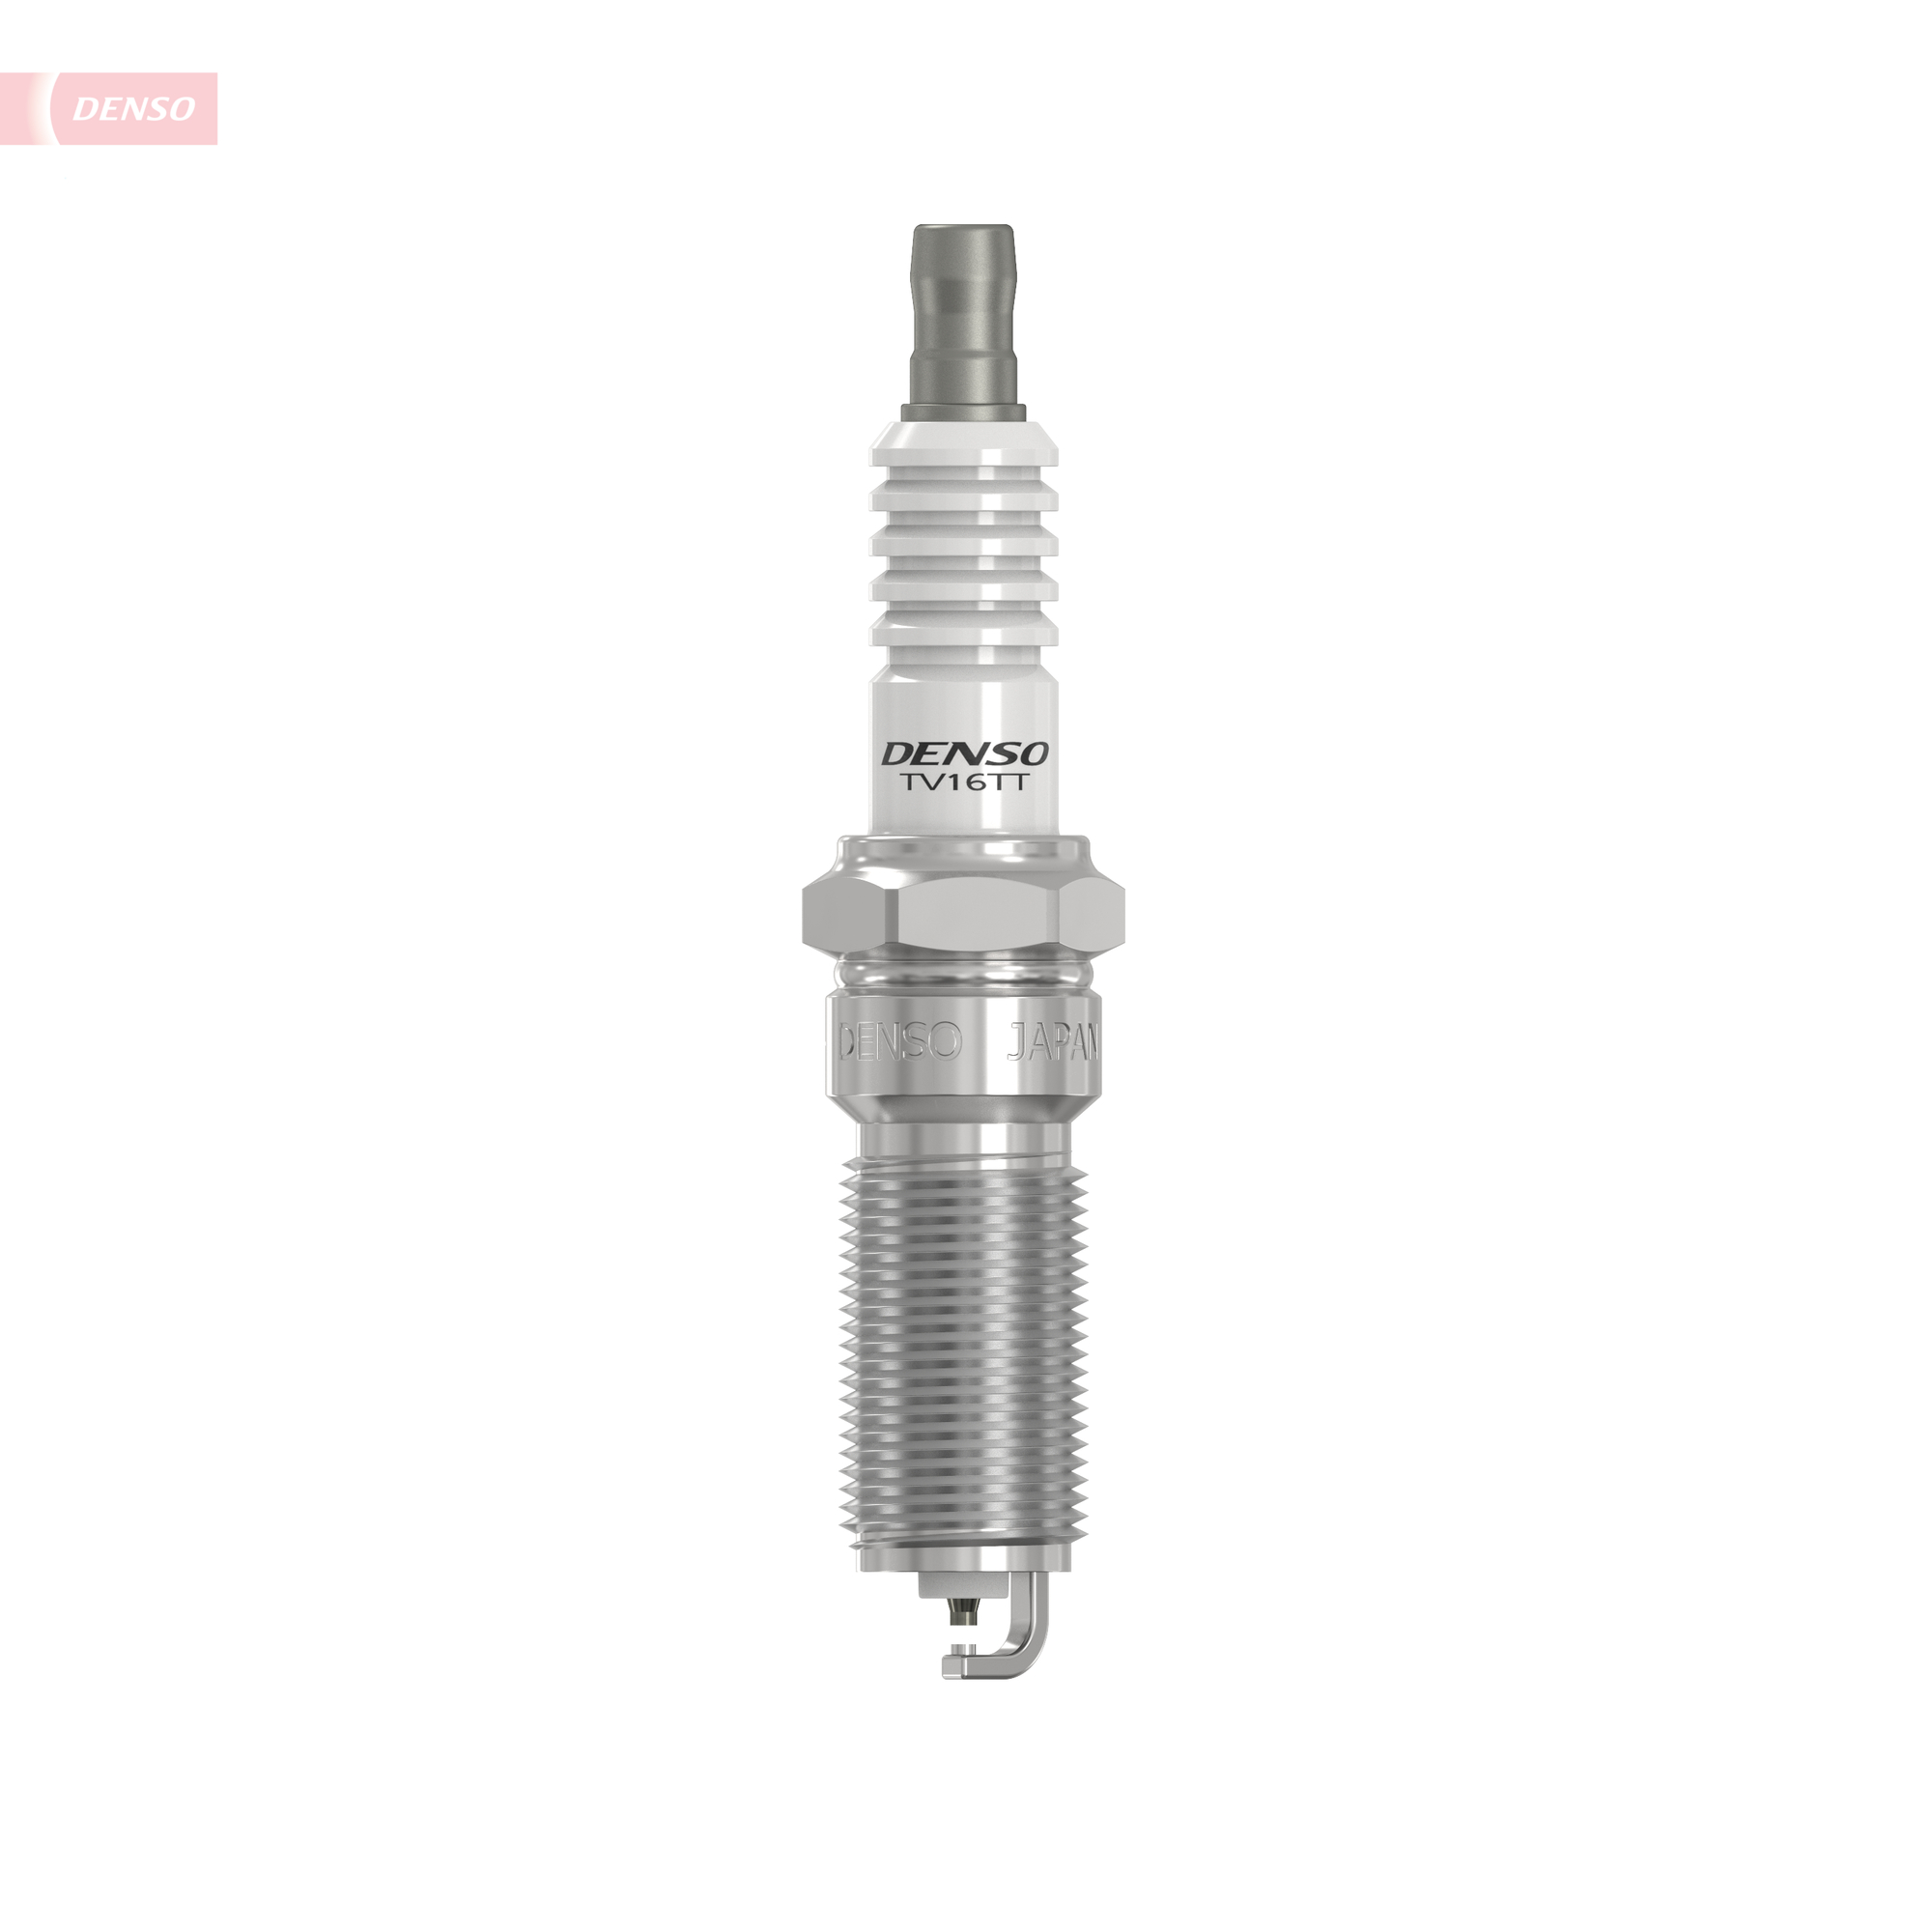 Picture of DENSO - TV16TT - Spark Plug (Ignition System)